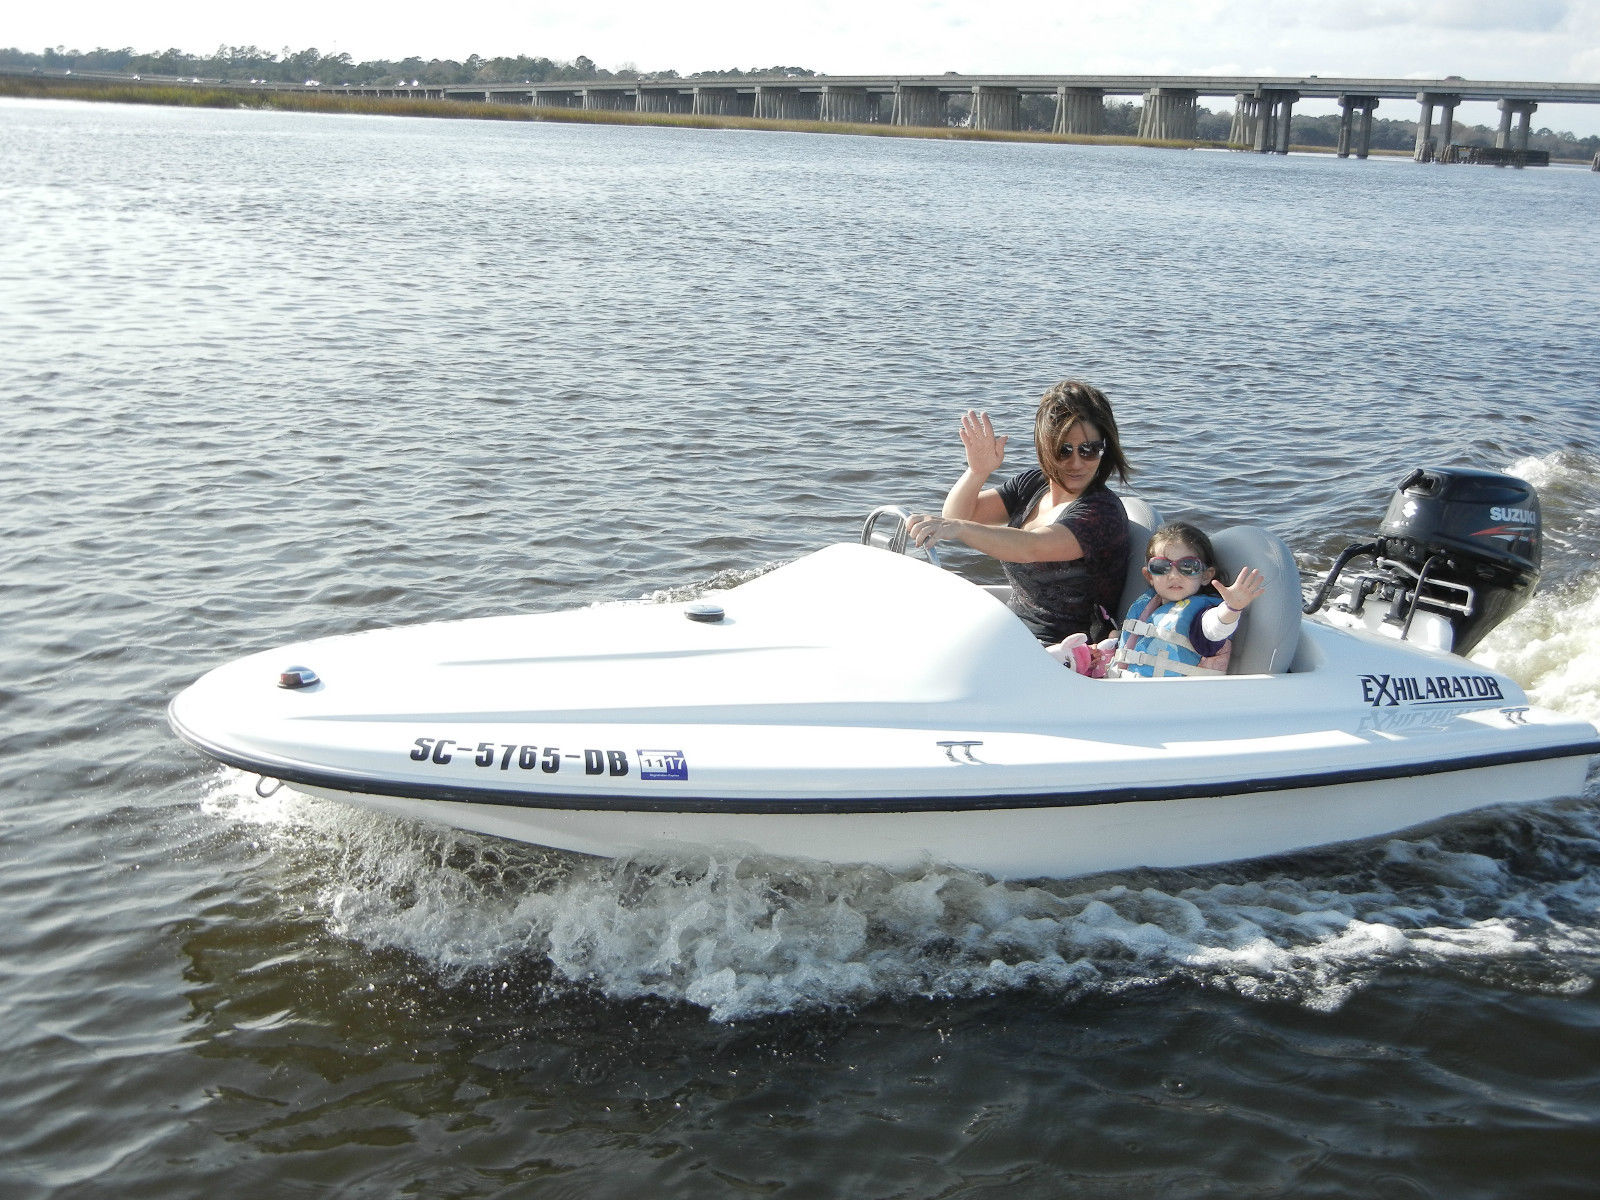 Exhilarator 101b 2015 For Sale For 5500 Boats From